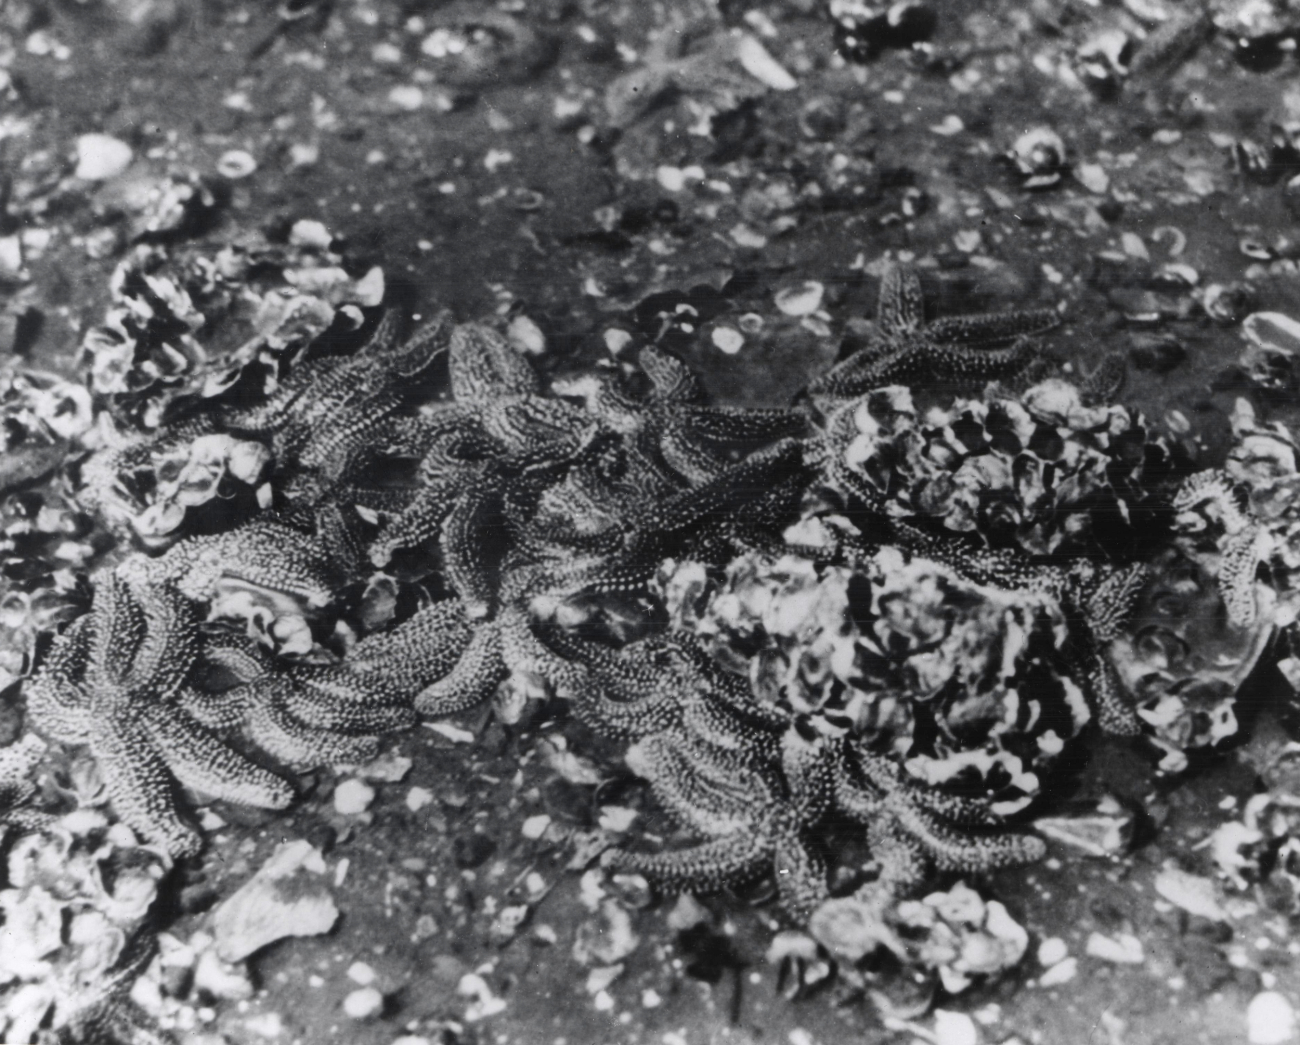 Aggregation of starfish on oyster bed